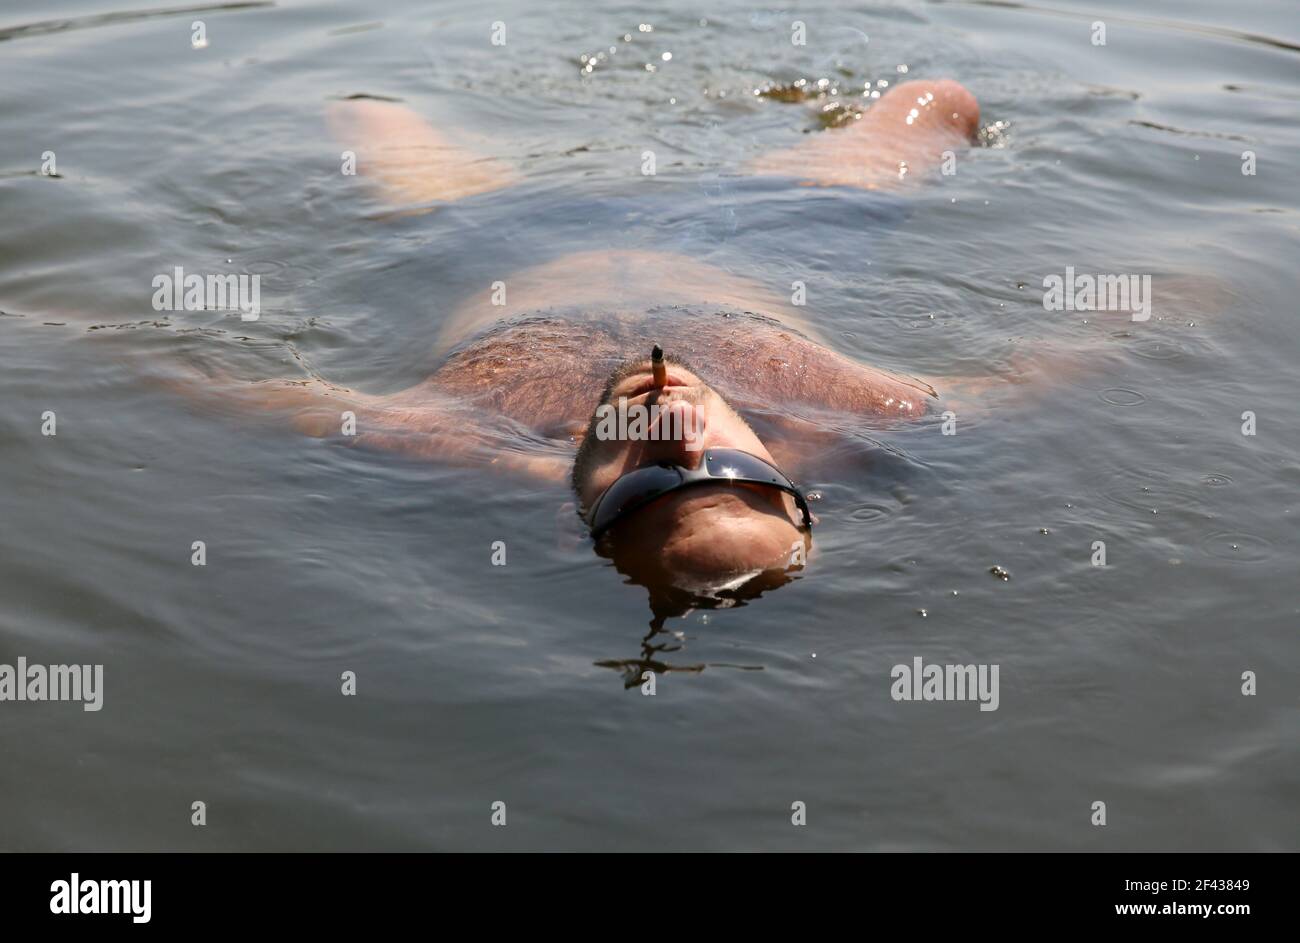 A man swims in a pond and relaxing smoking a cigarette Stock Photo